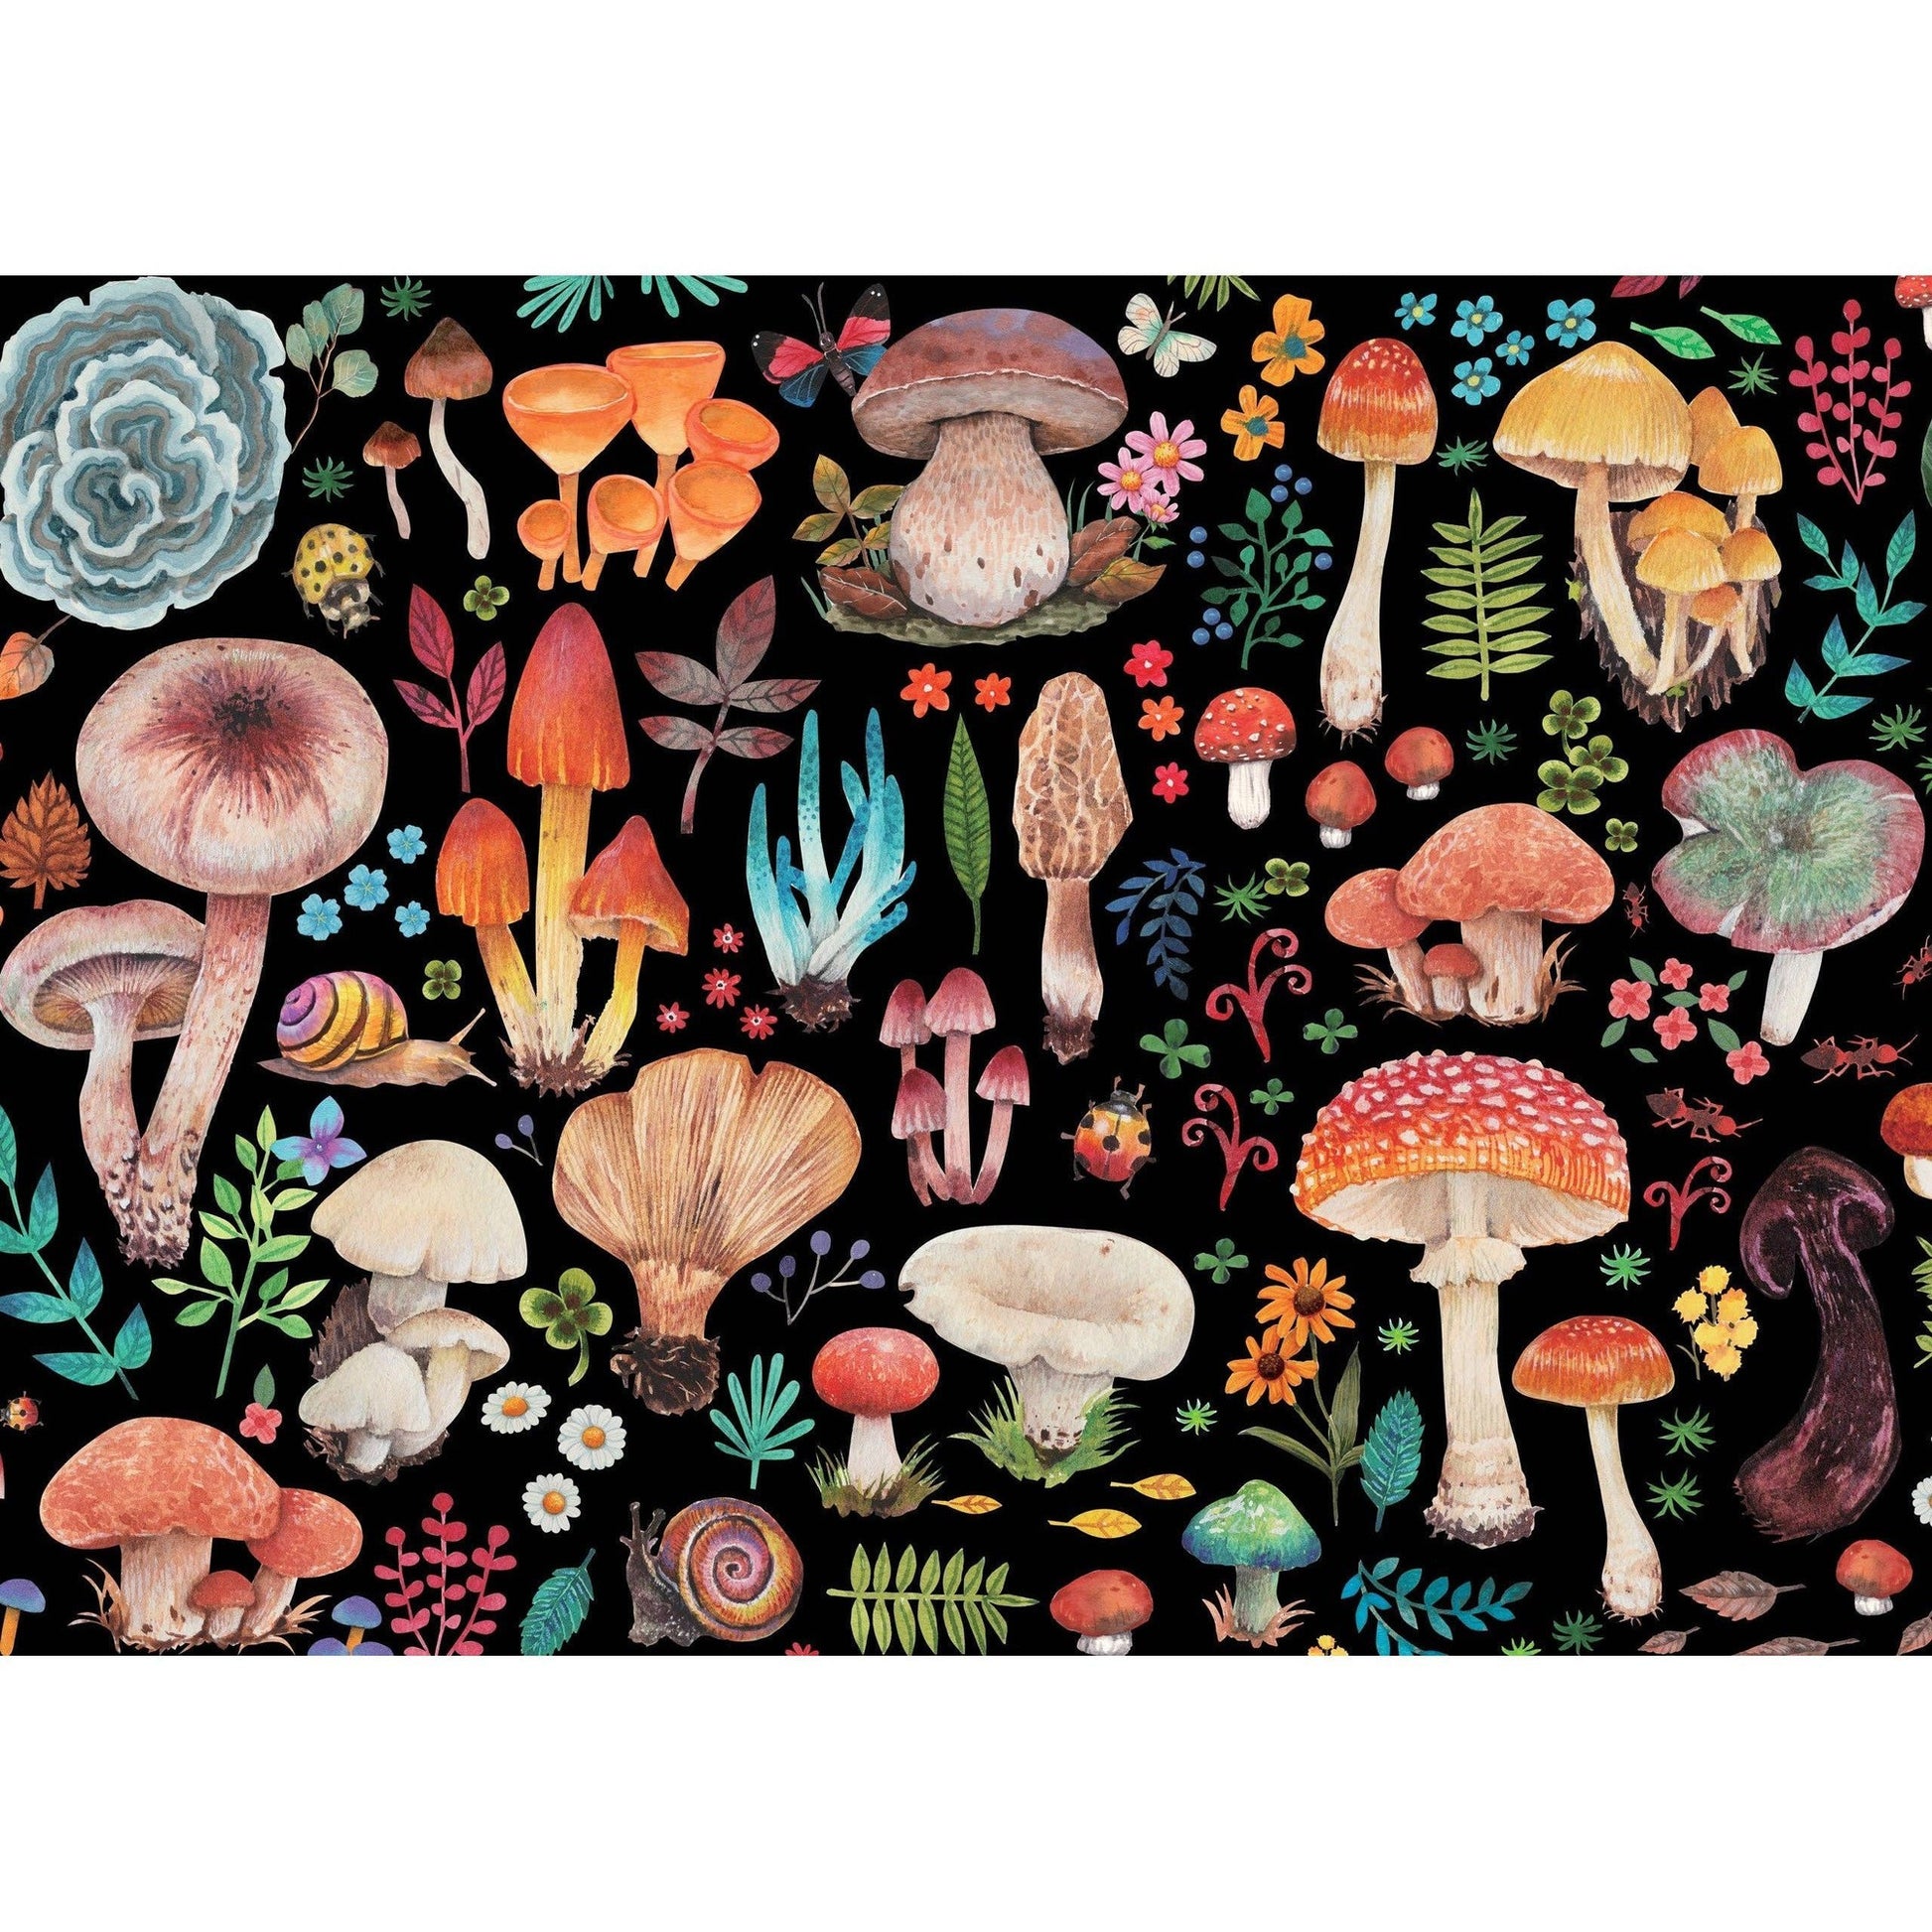 Mushrooms 1000 Piece Jigsaw Puzzle | Fung-tastic Picture Puzzle